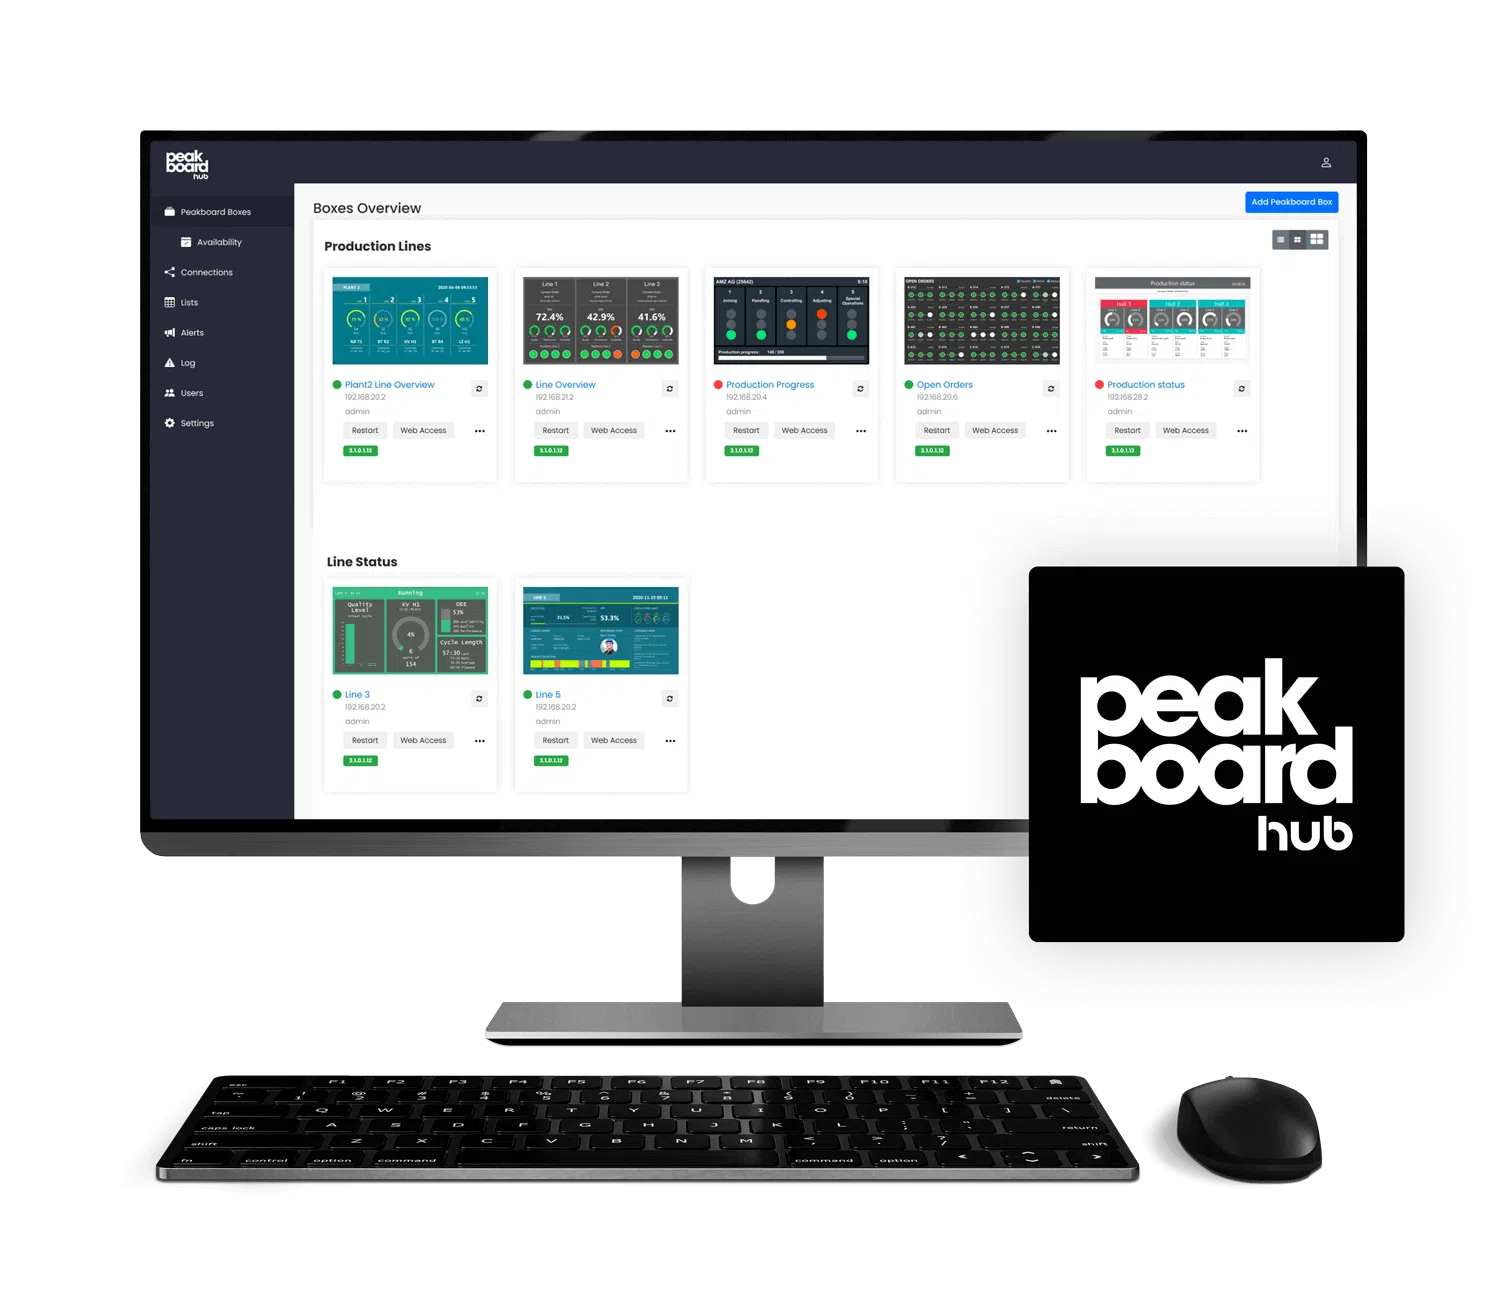 Peakboard Hub Online - An introduction for complete beginners